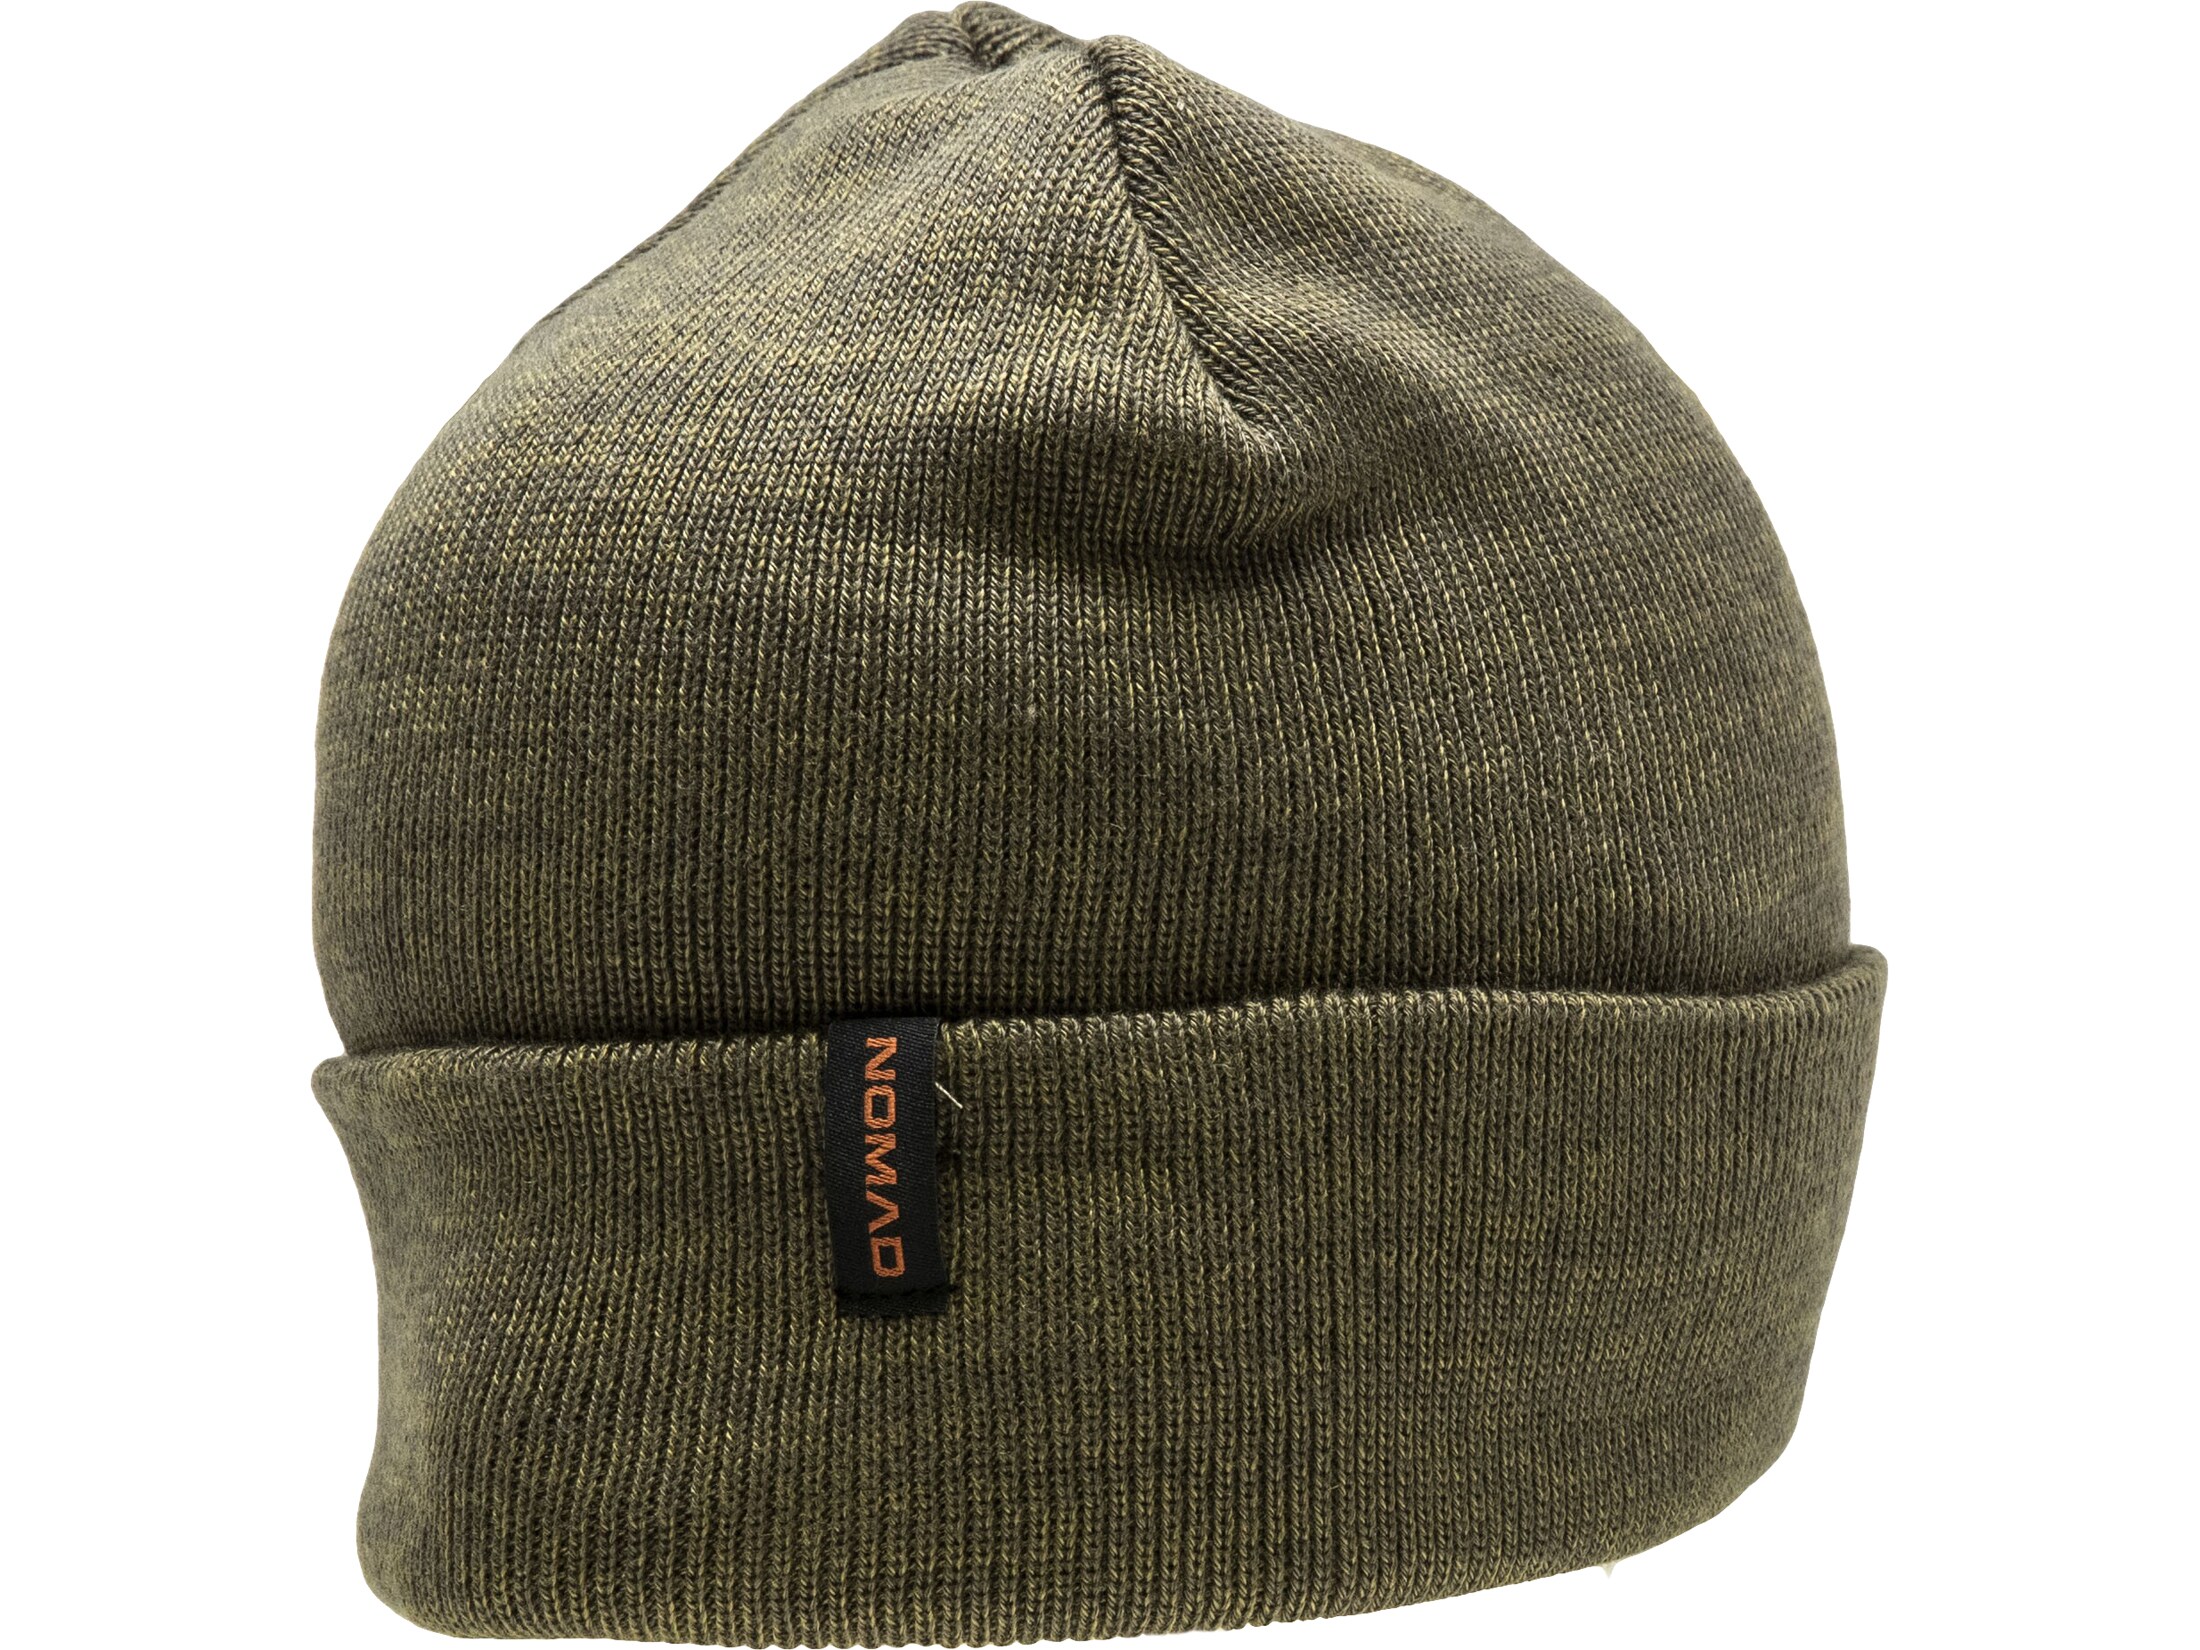 Nomad Men's Nomad Beanie Mud One Size Fits Most